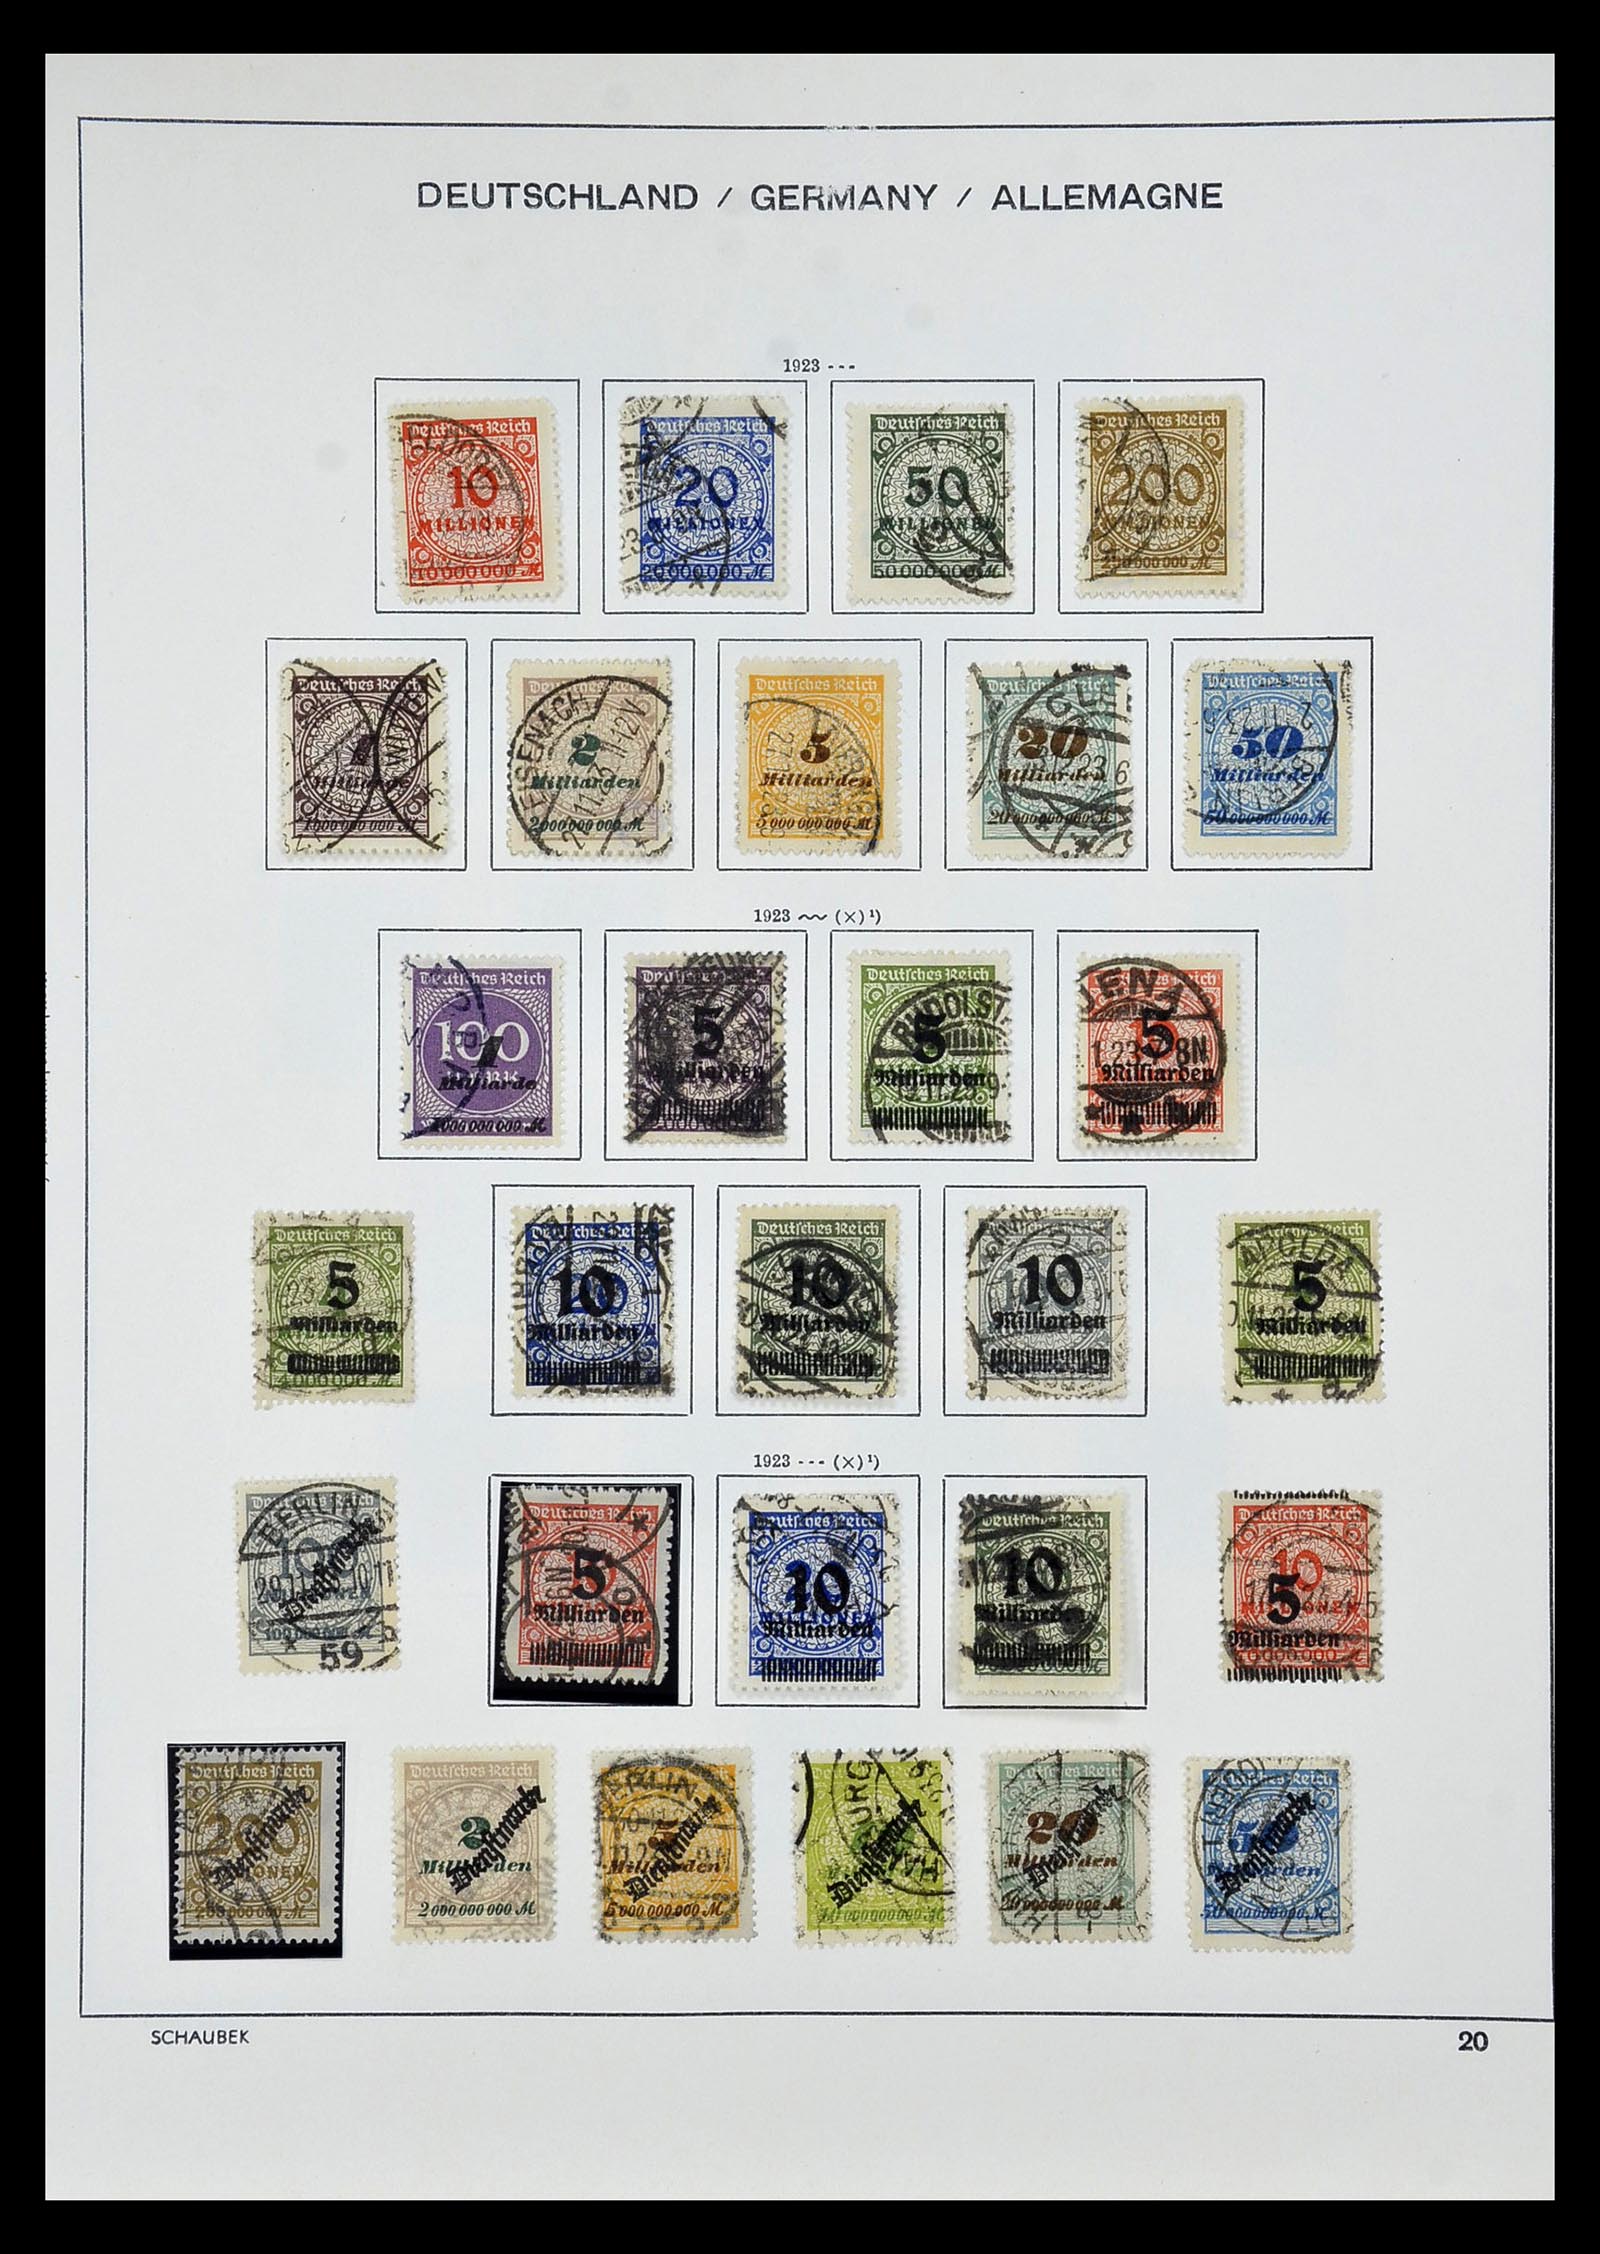 35006 014 - Stamp Collection 35006 German Reich infla 1919-1923.